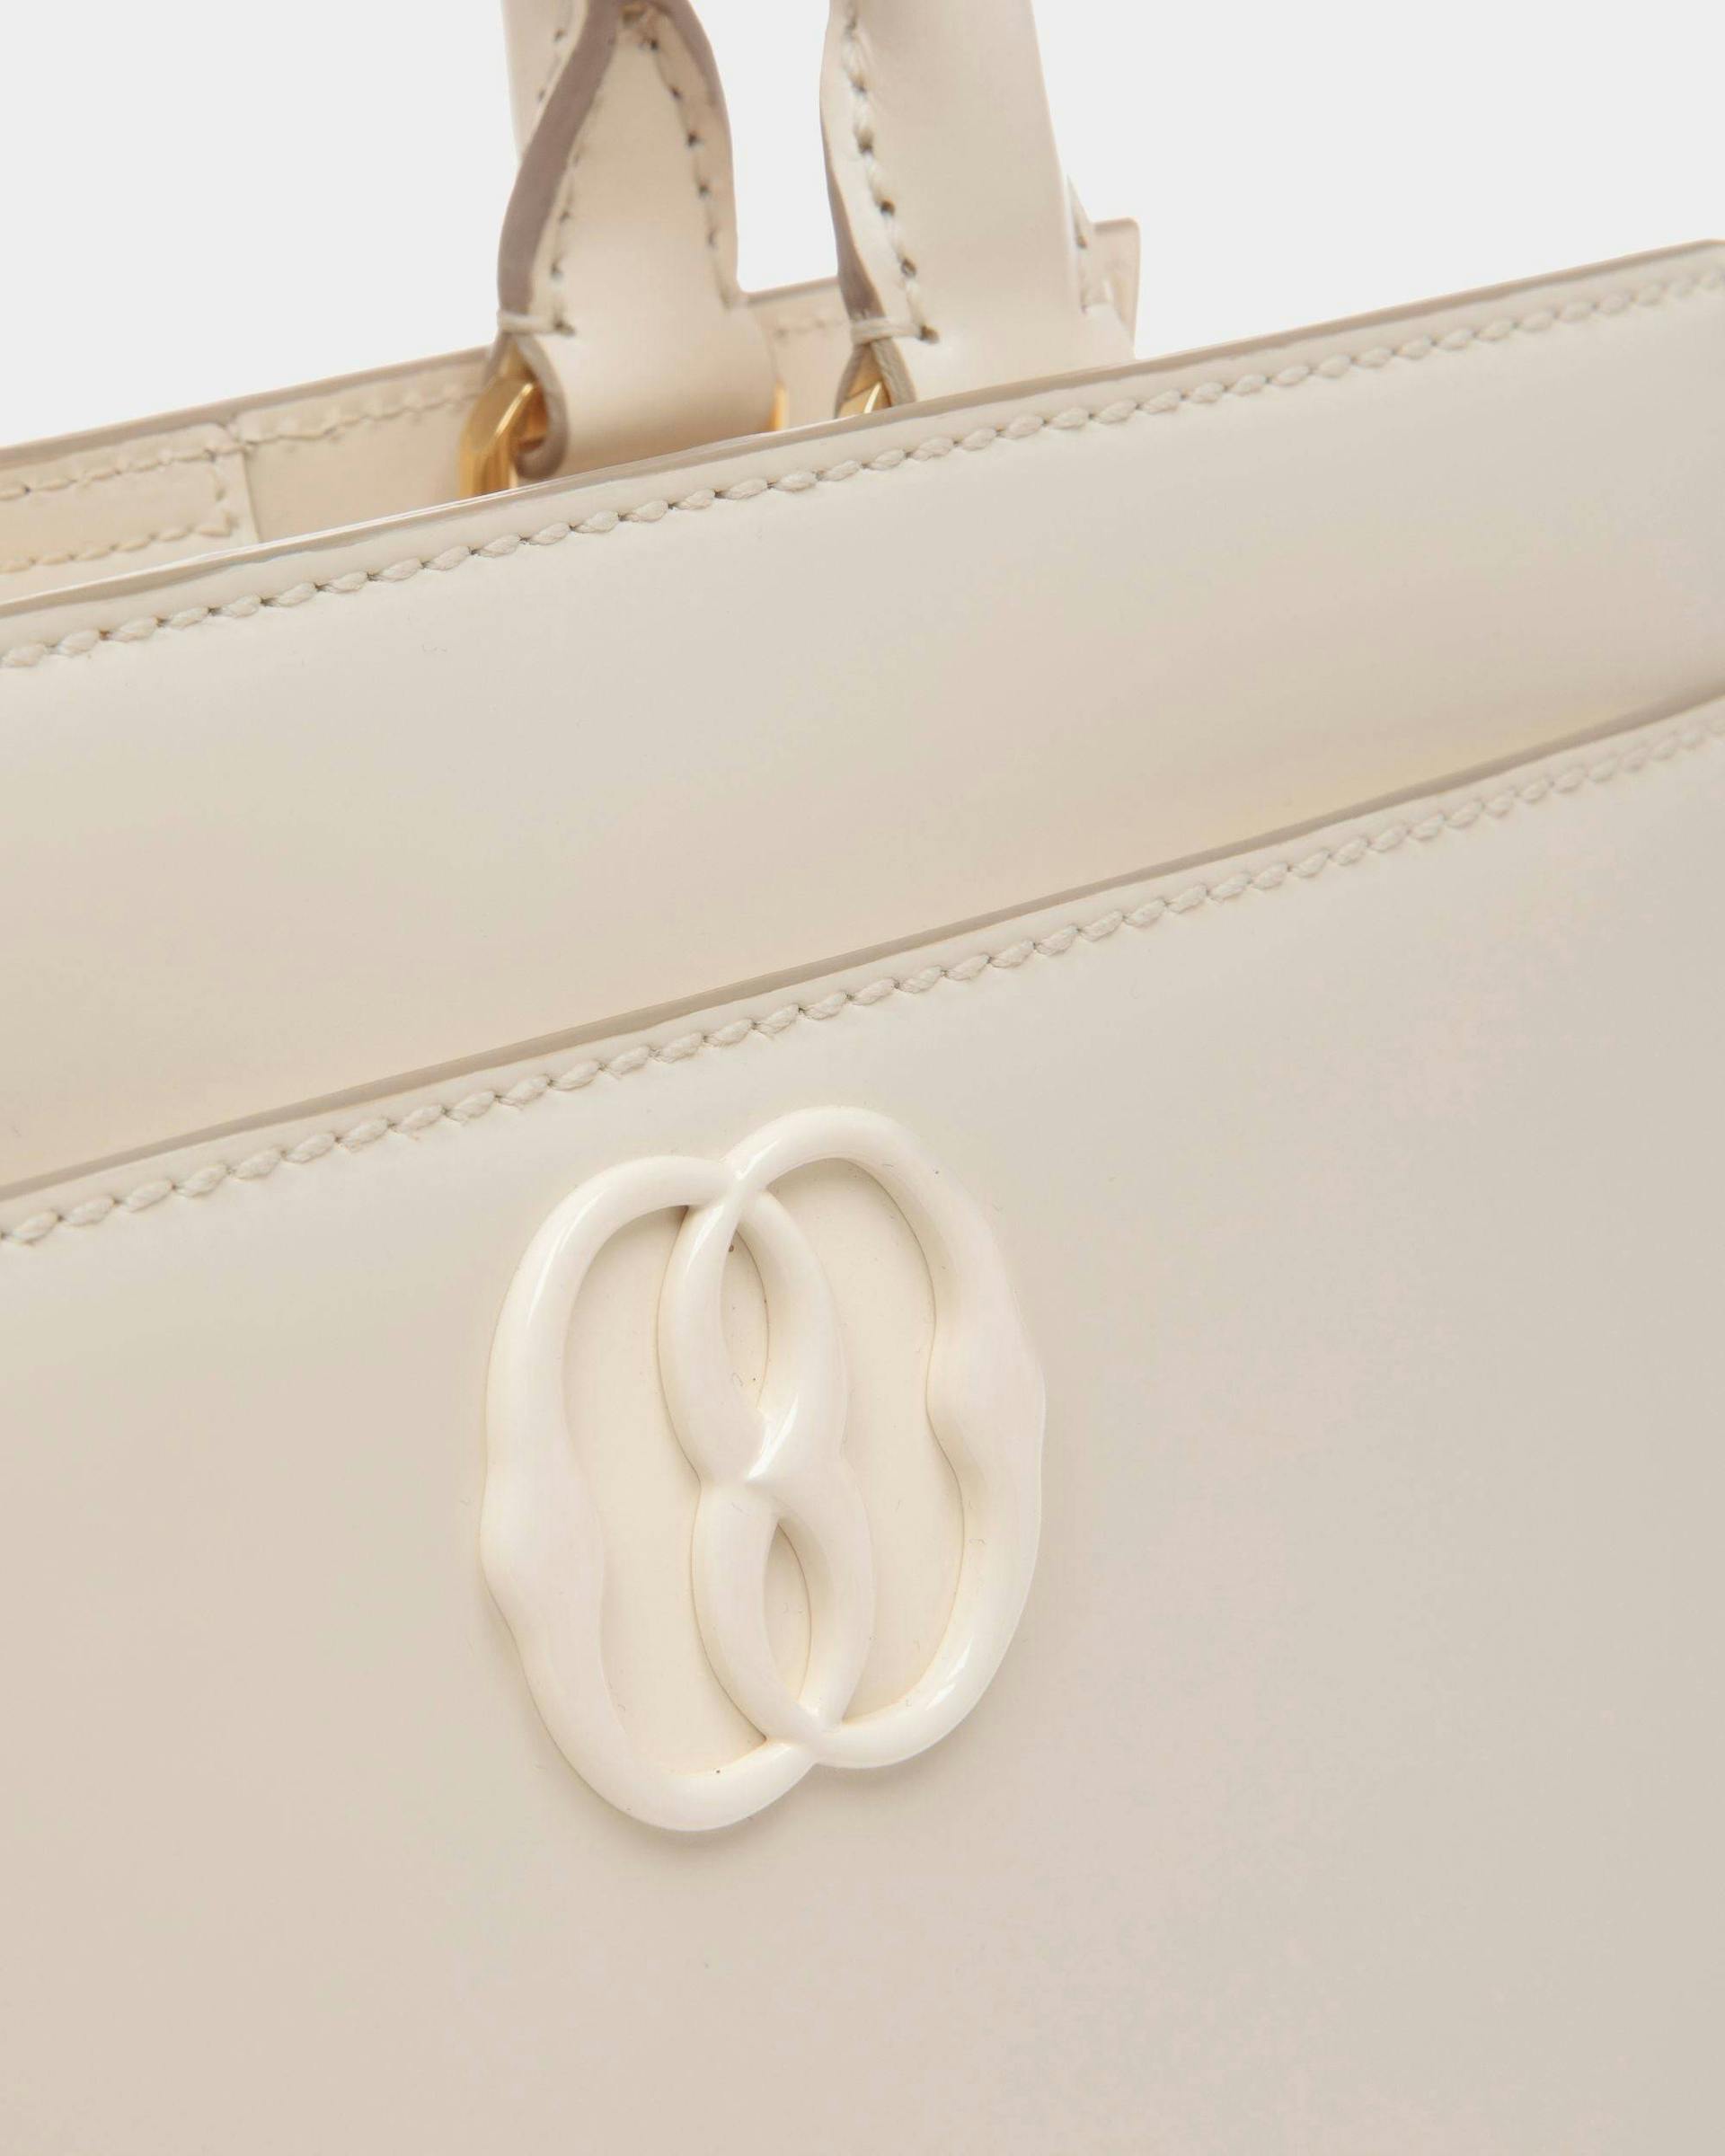 Women's Emblem Small Tote Bag in White Patent Leather | Bally | Still Life Detail